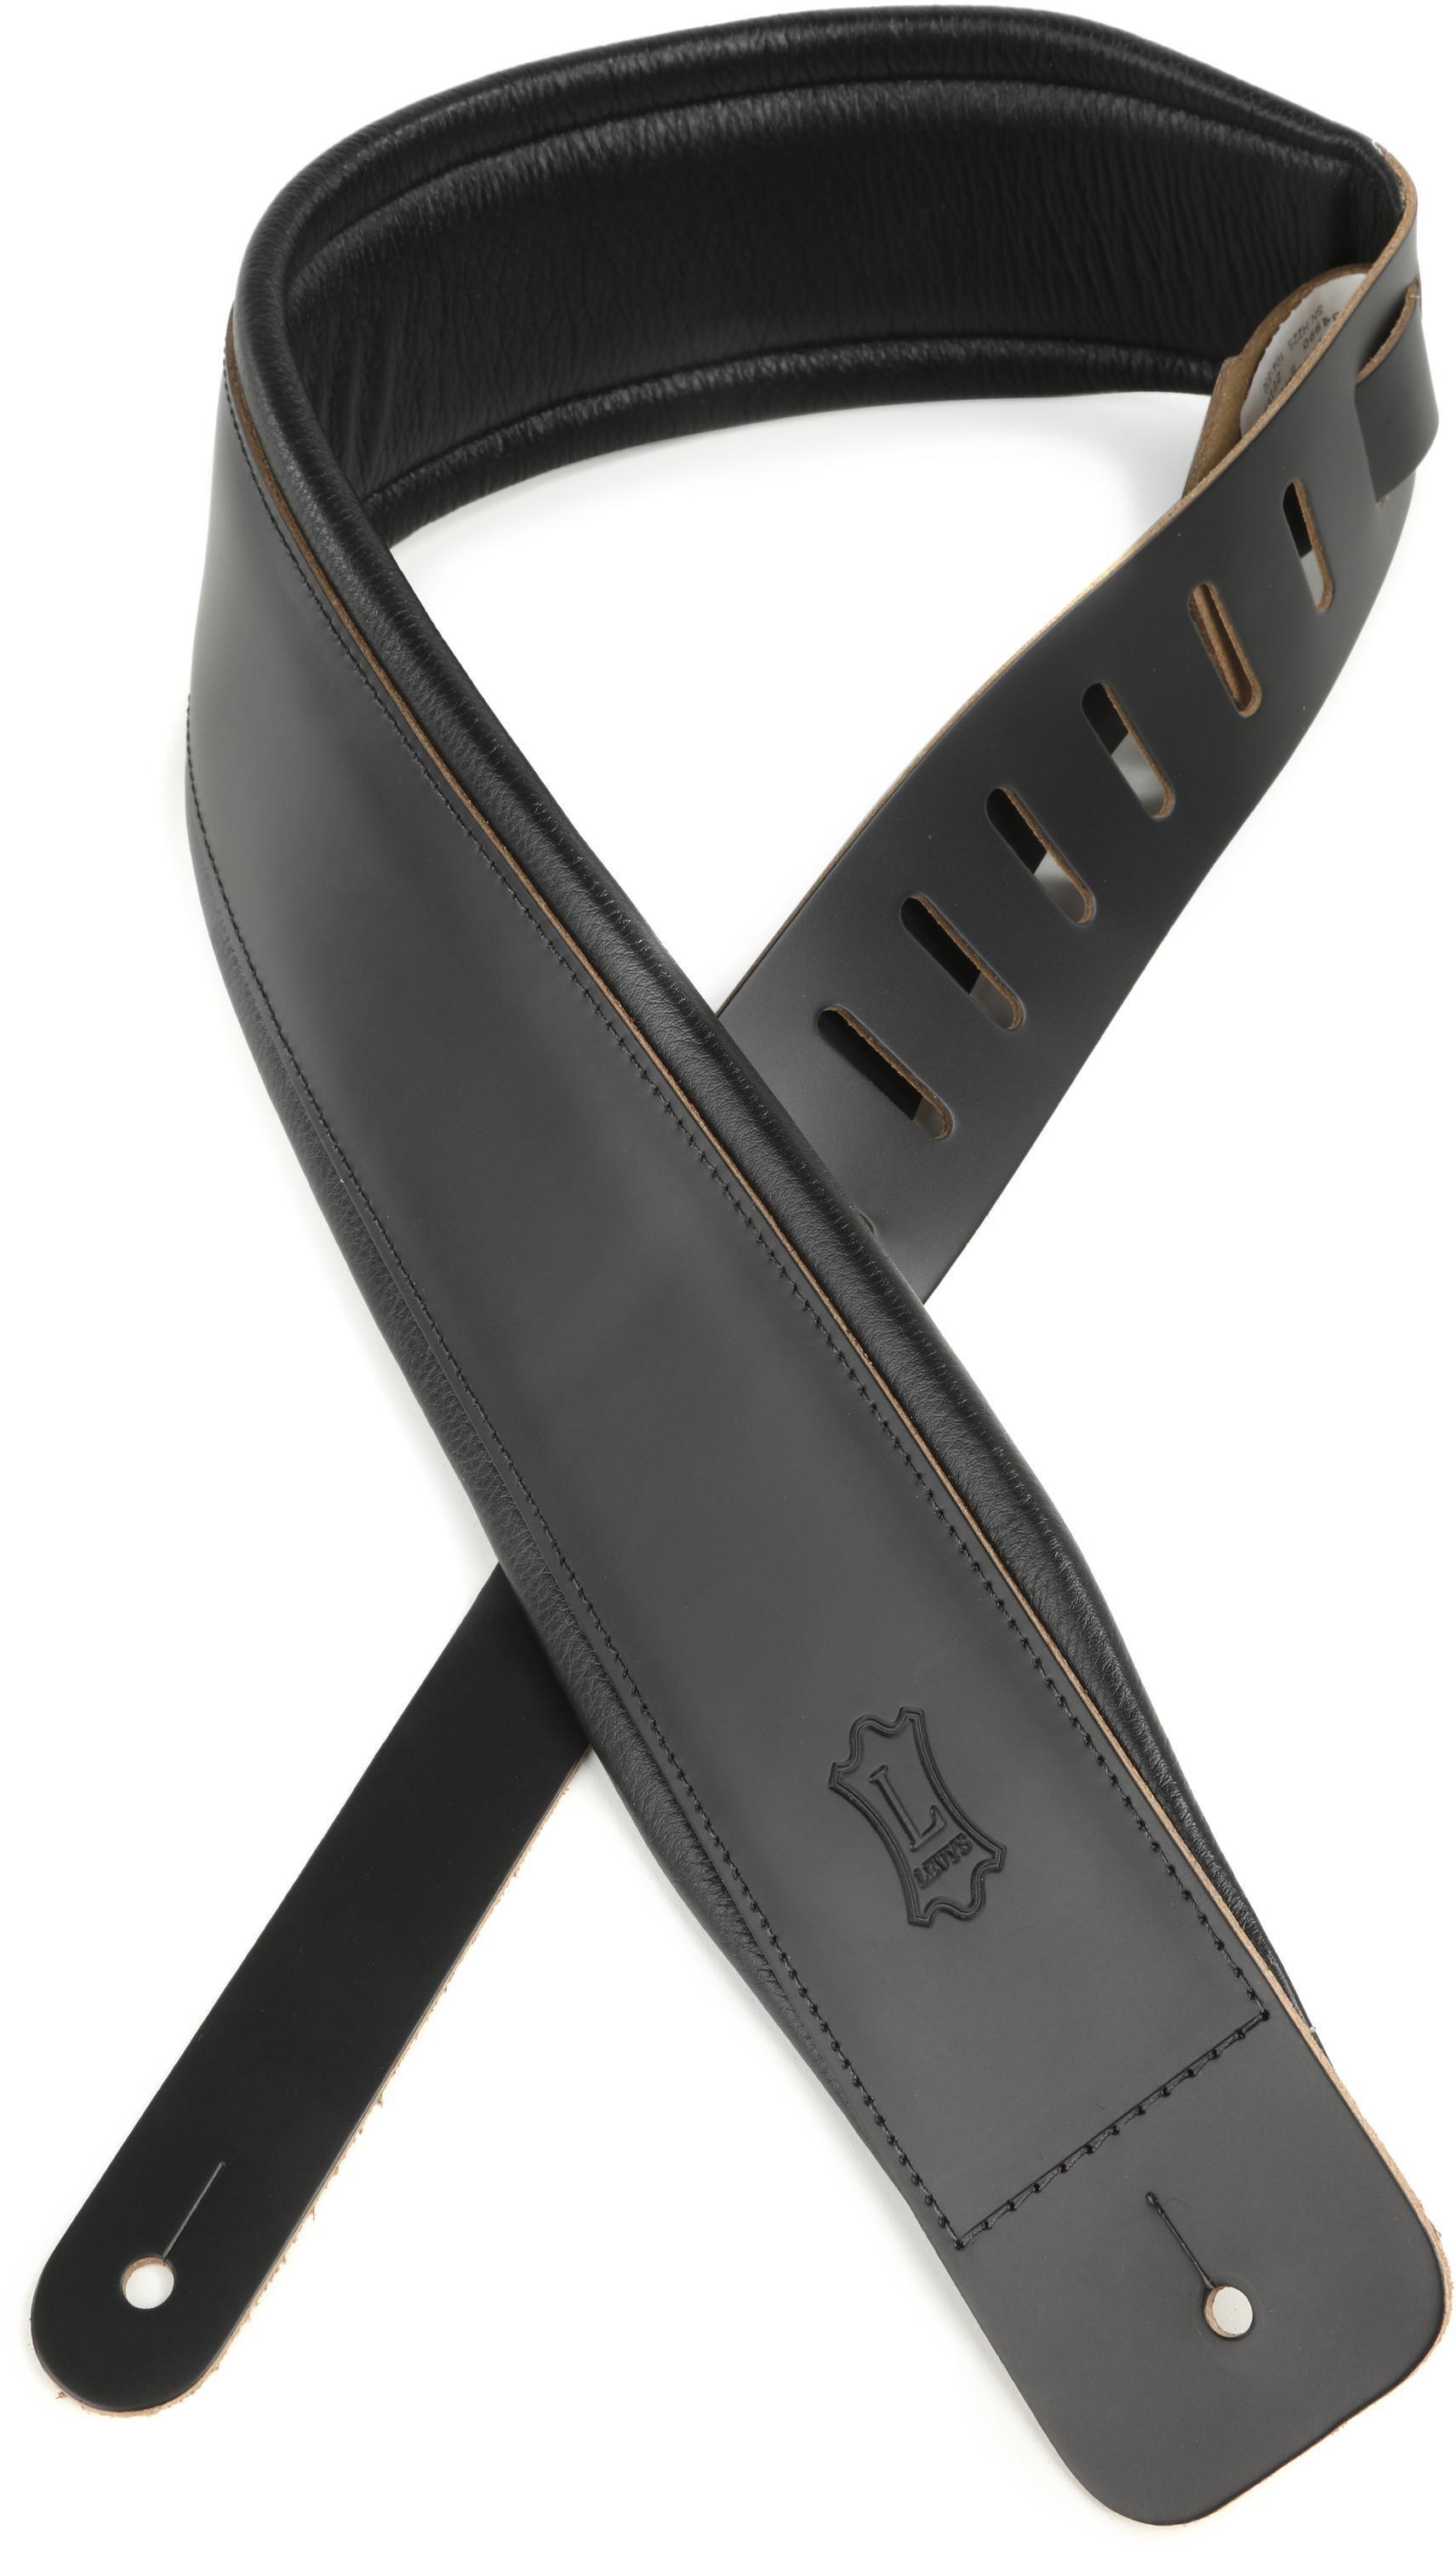 Levy's DM1PD-BLK 3-inch Leather Guitar Strap with Padded Interior- Black